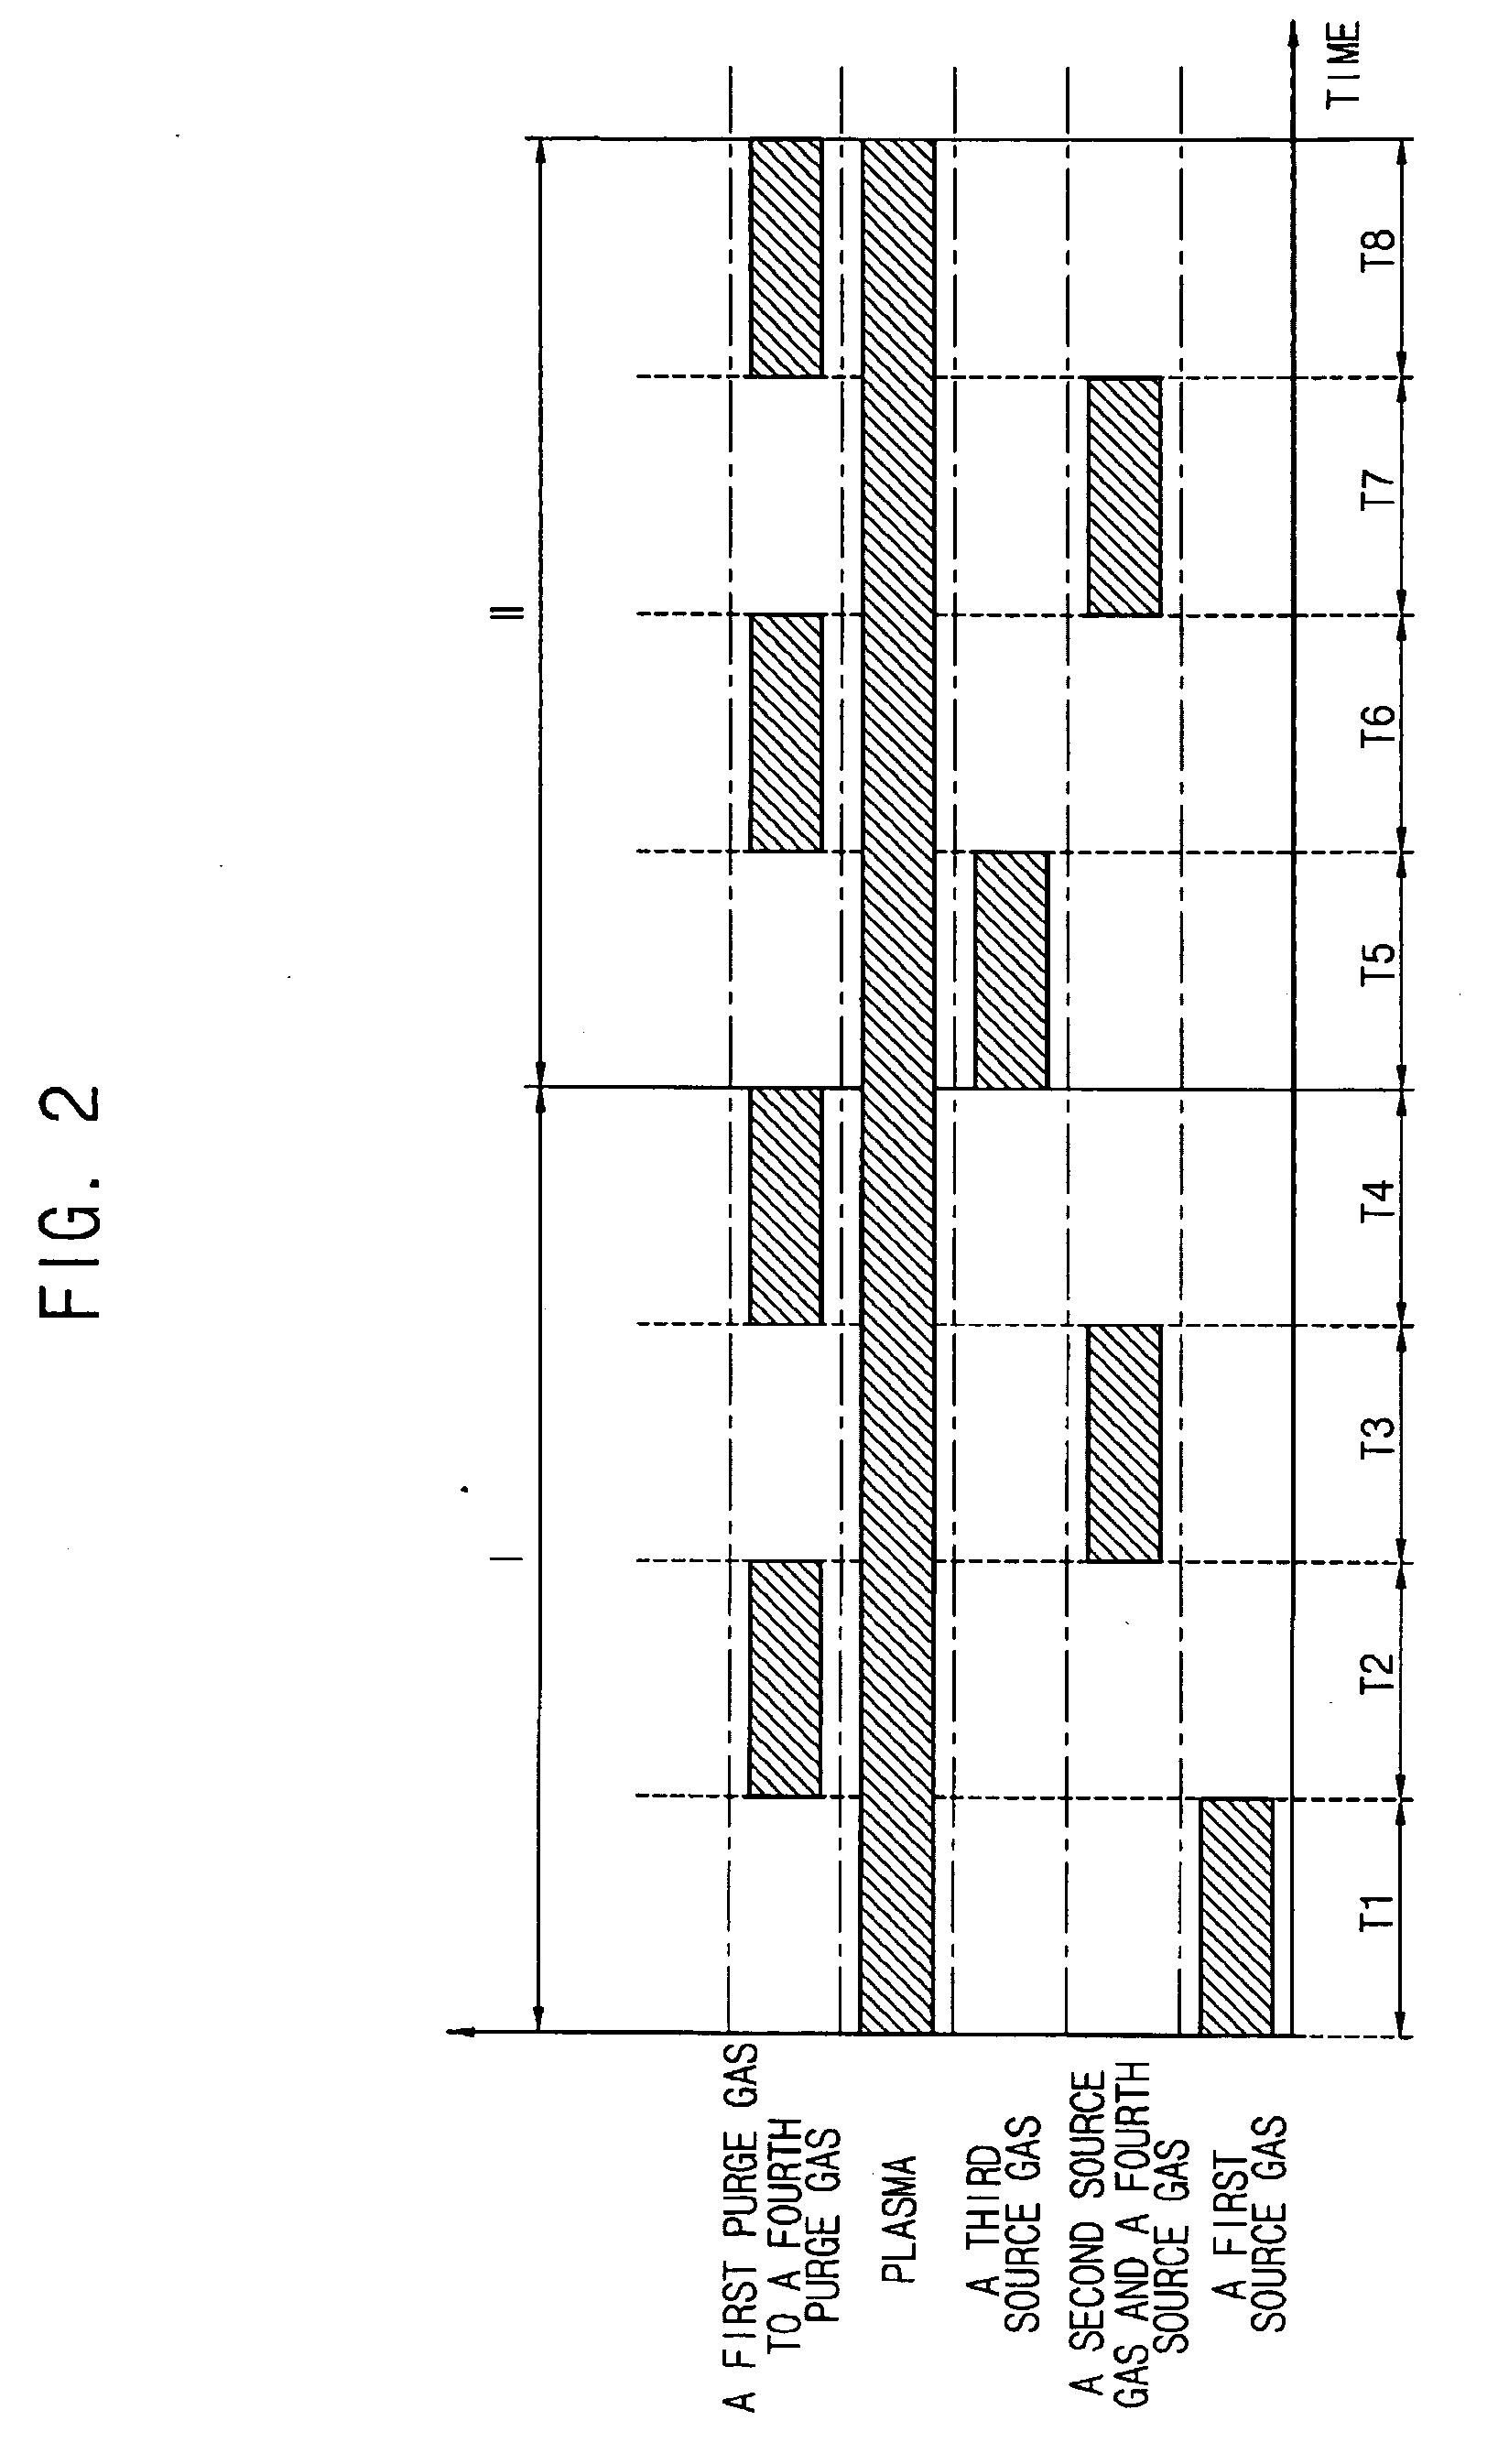 Method of forming a phase changeable material layer, a method of manufacturing a phase changeable memory unit, and a method of manufacturing a phase changeable semiconductor memory device